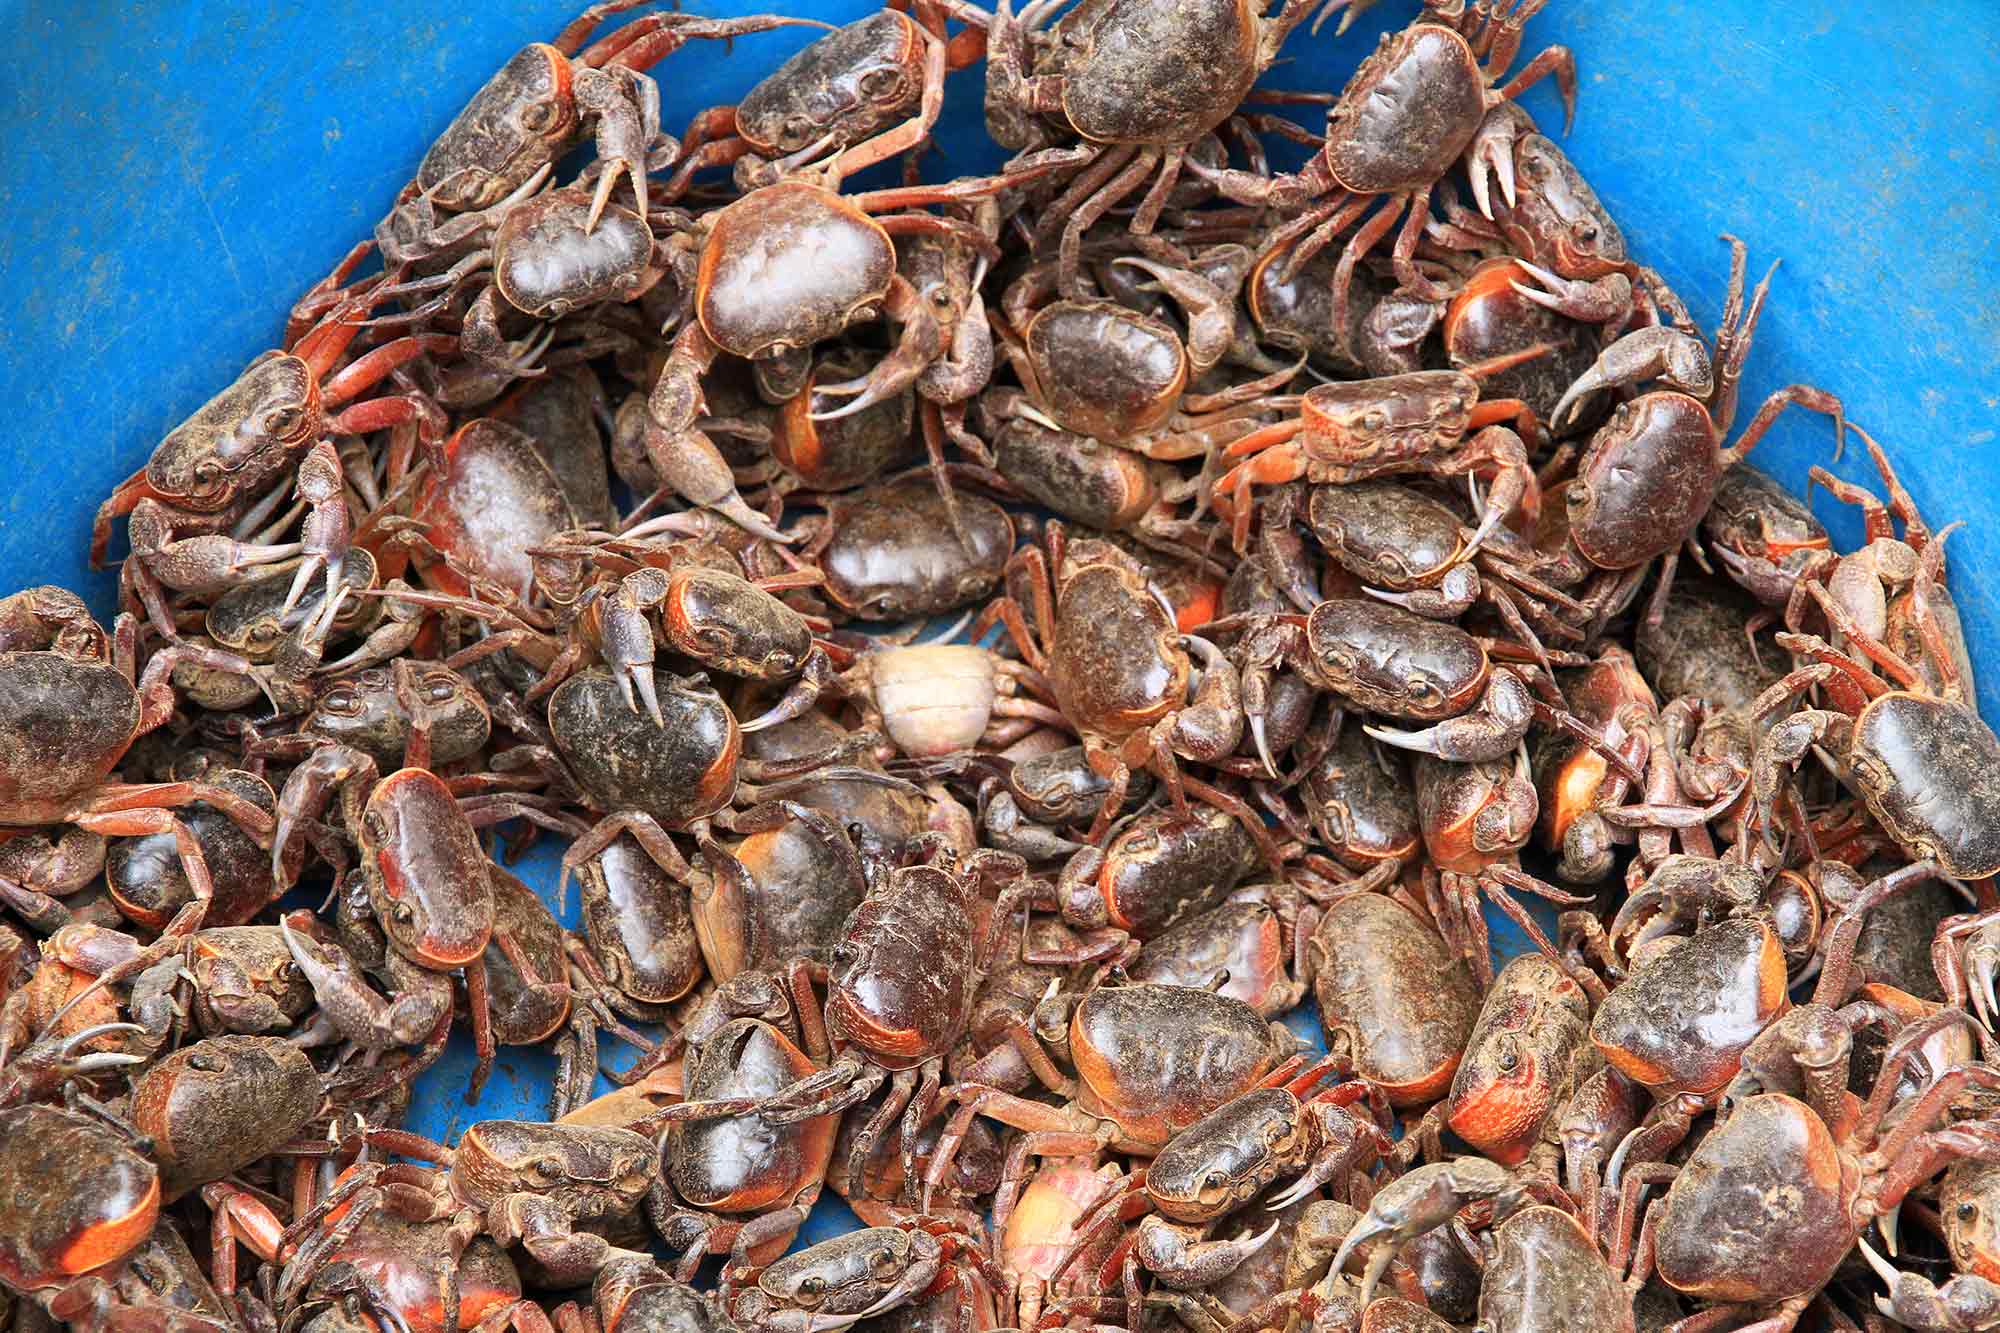 Live crabs at a market in Vientiane, Laos. © Ulli Maier & Nisa Maier